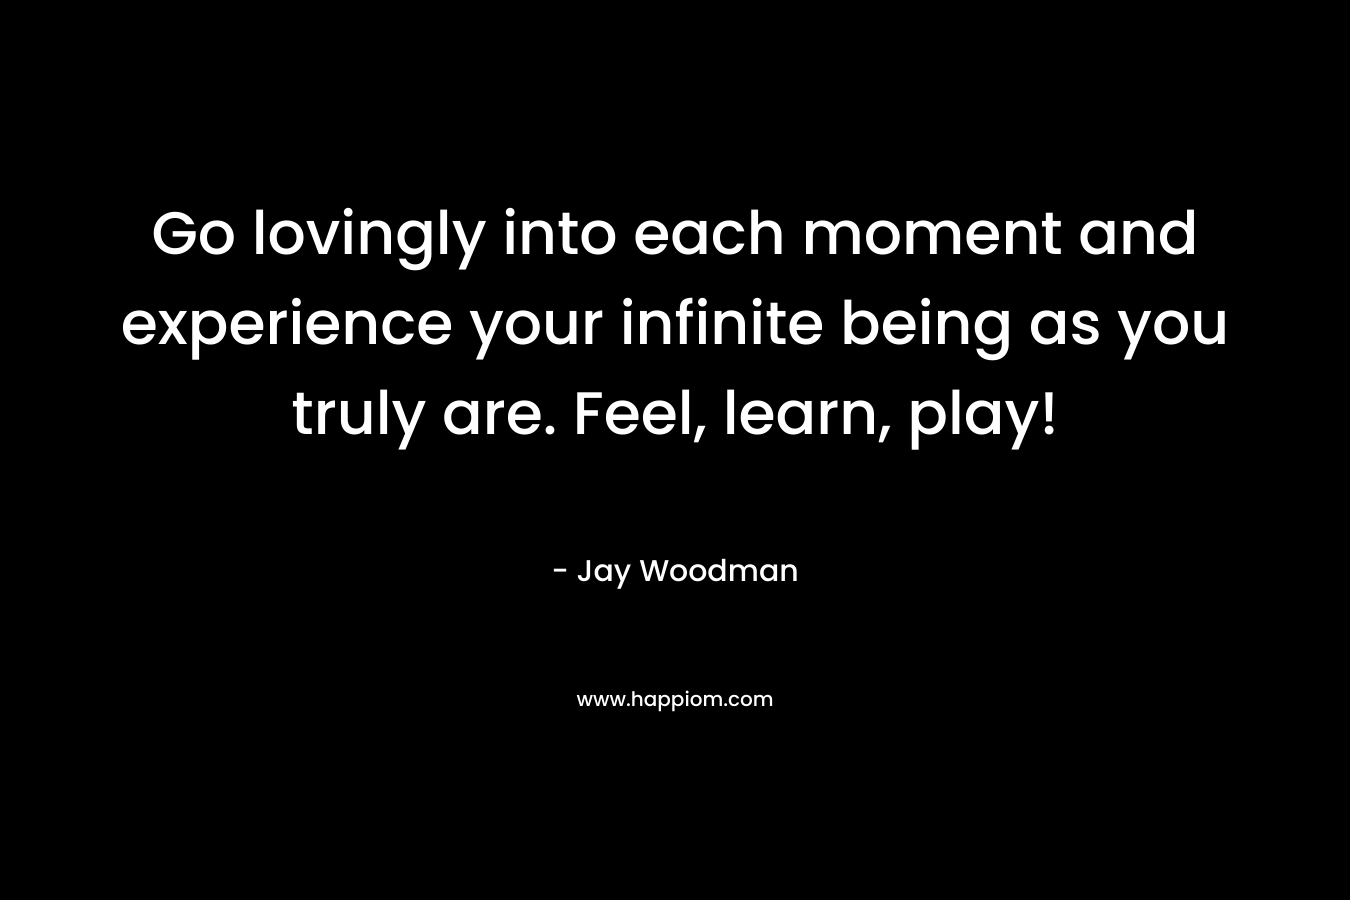 Go lovingly into each moment and experience your infinite being as you truly are. Feel, learn, play! – Jay Woodman